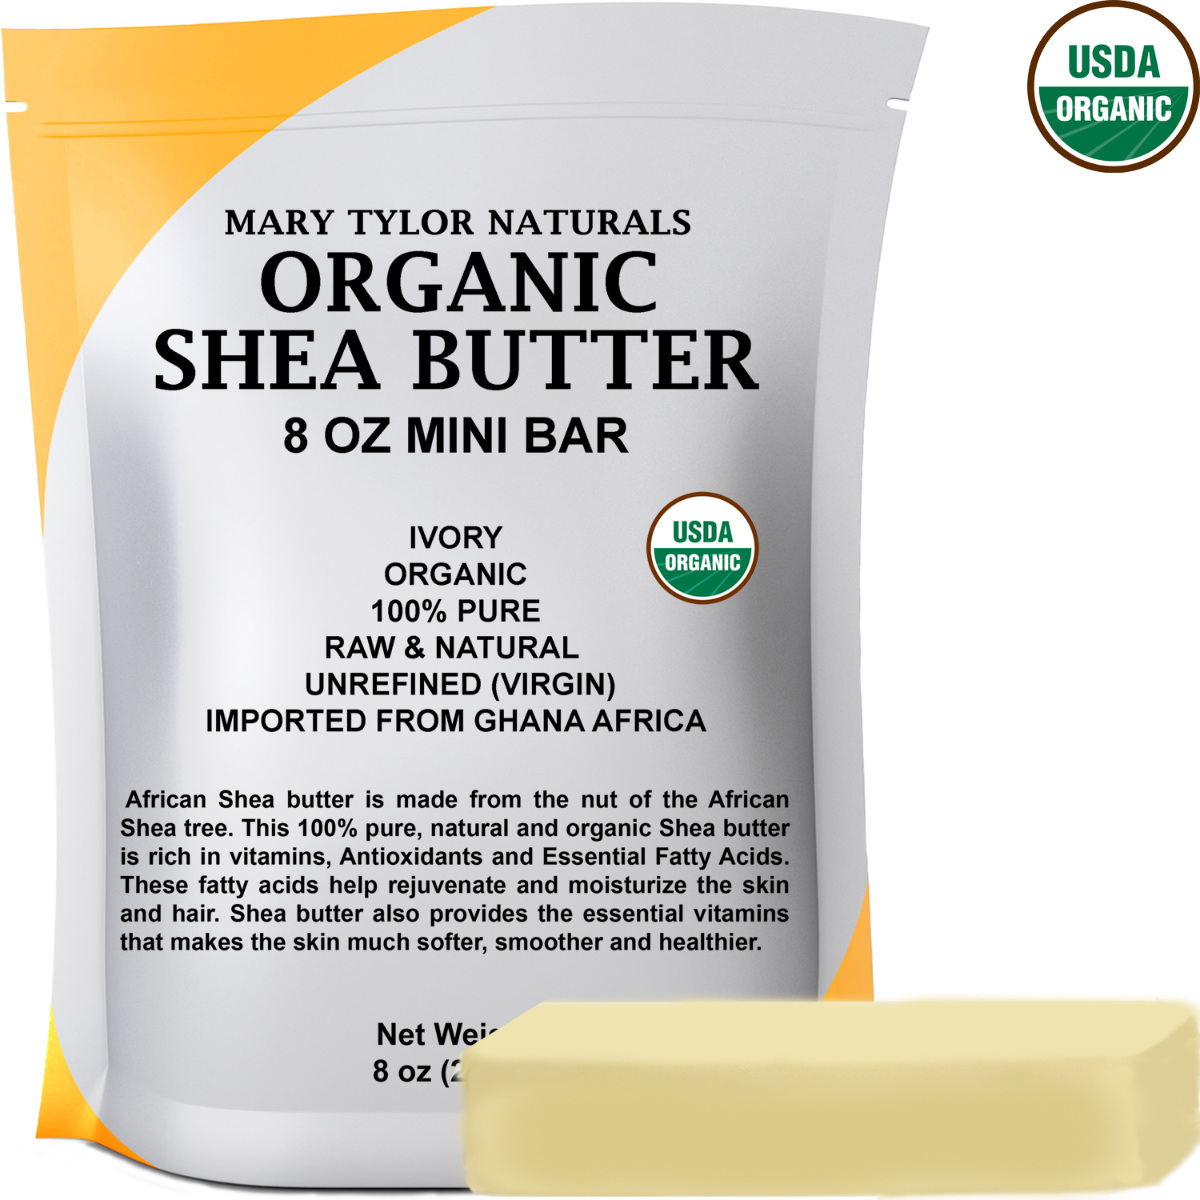 African Shea Butter - 25Lbs - (Ivory/White) - 100% Natural Raw Bulk Organic  - From Ghana